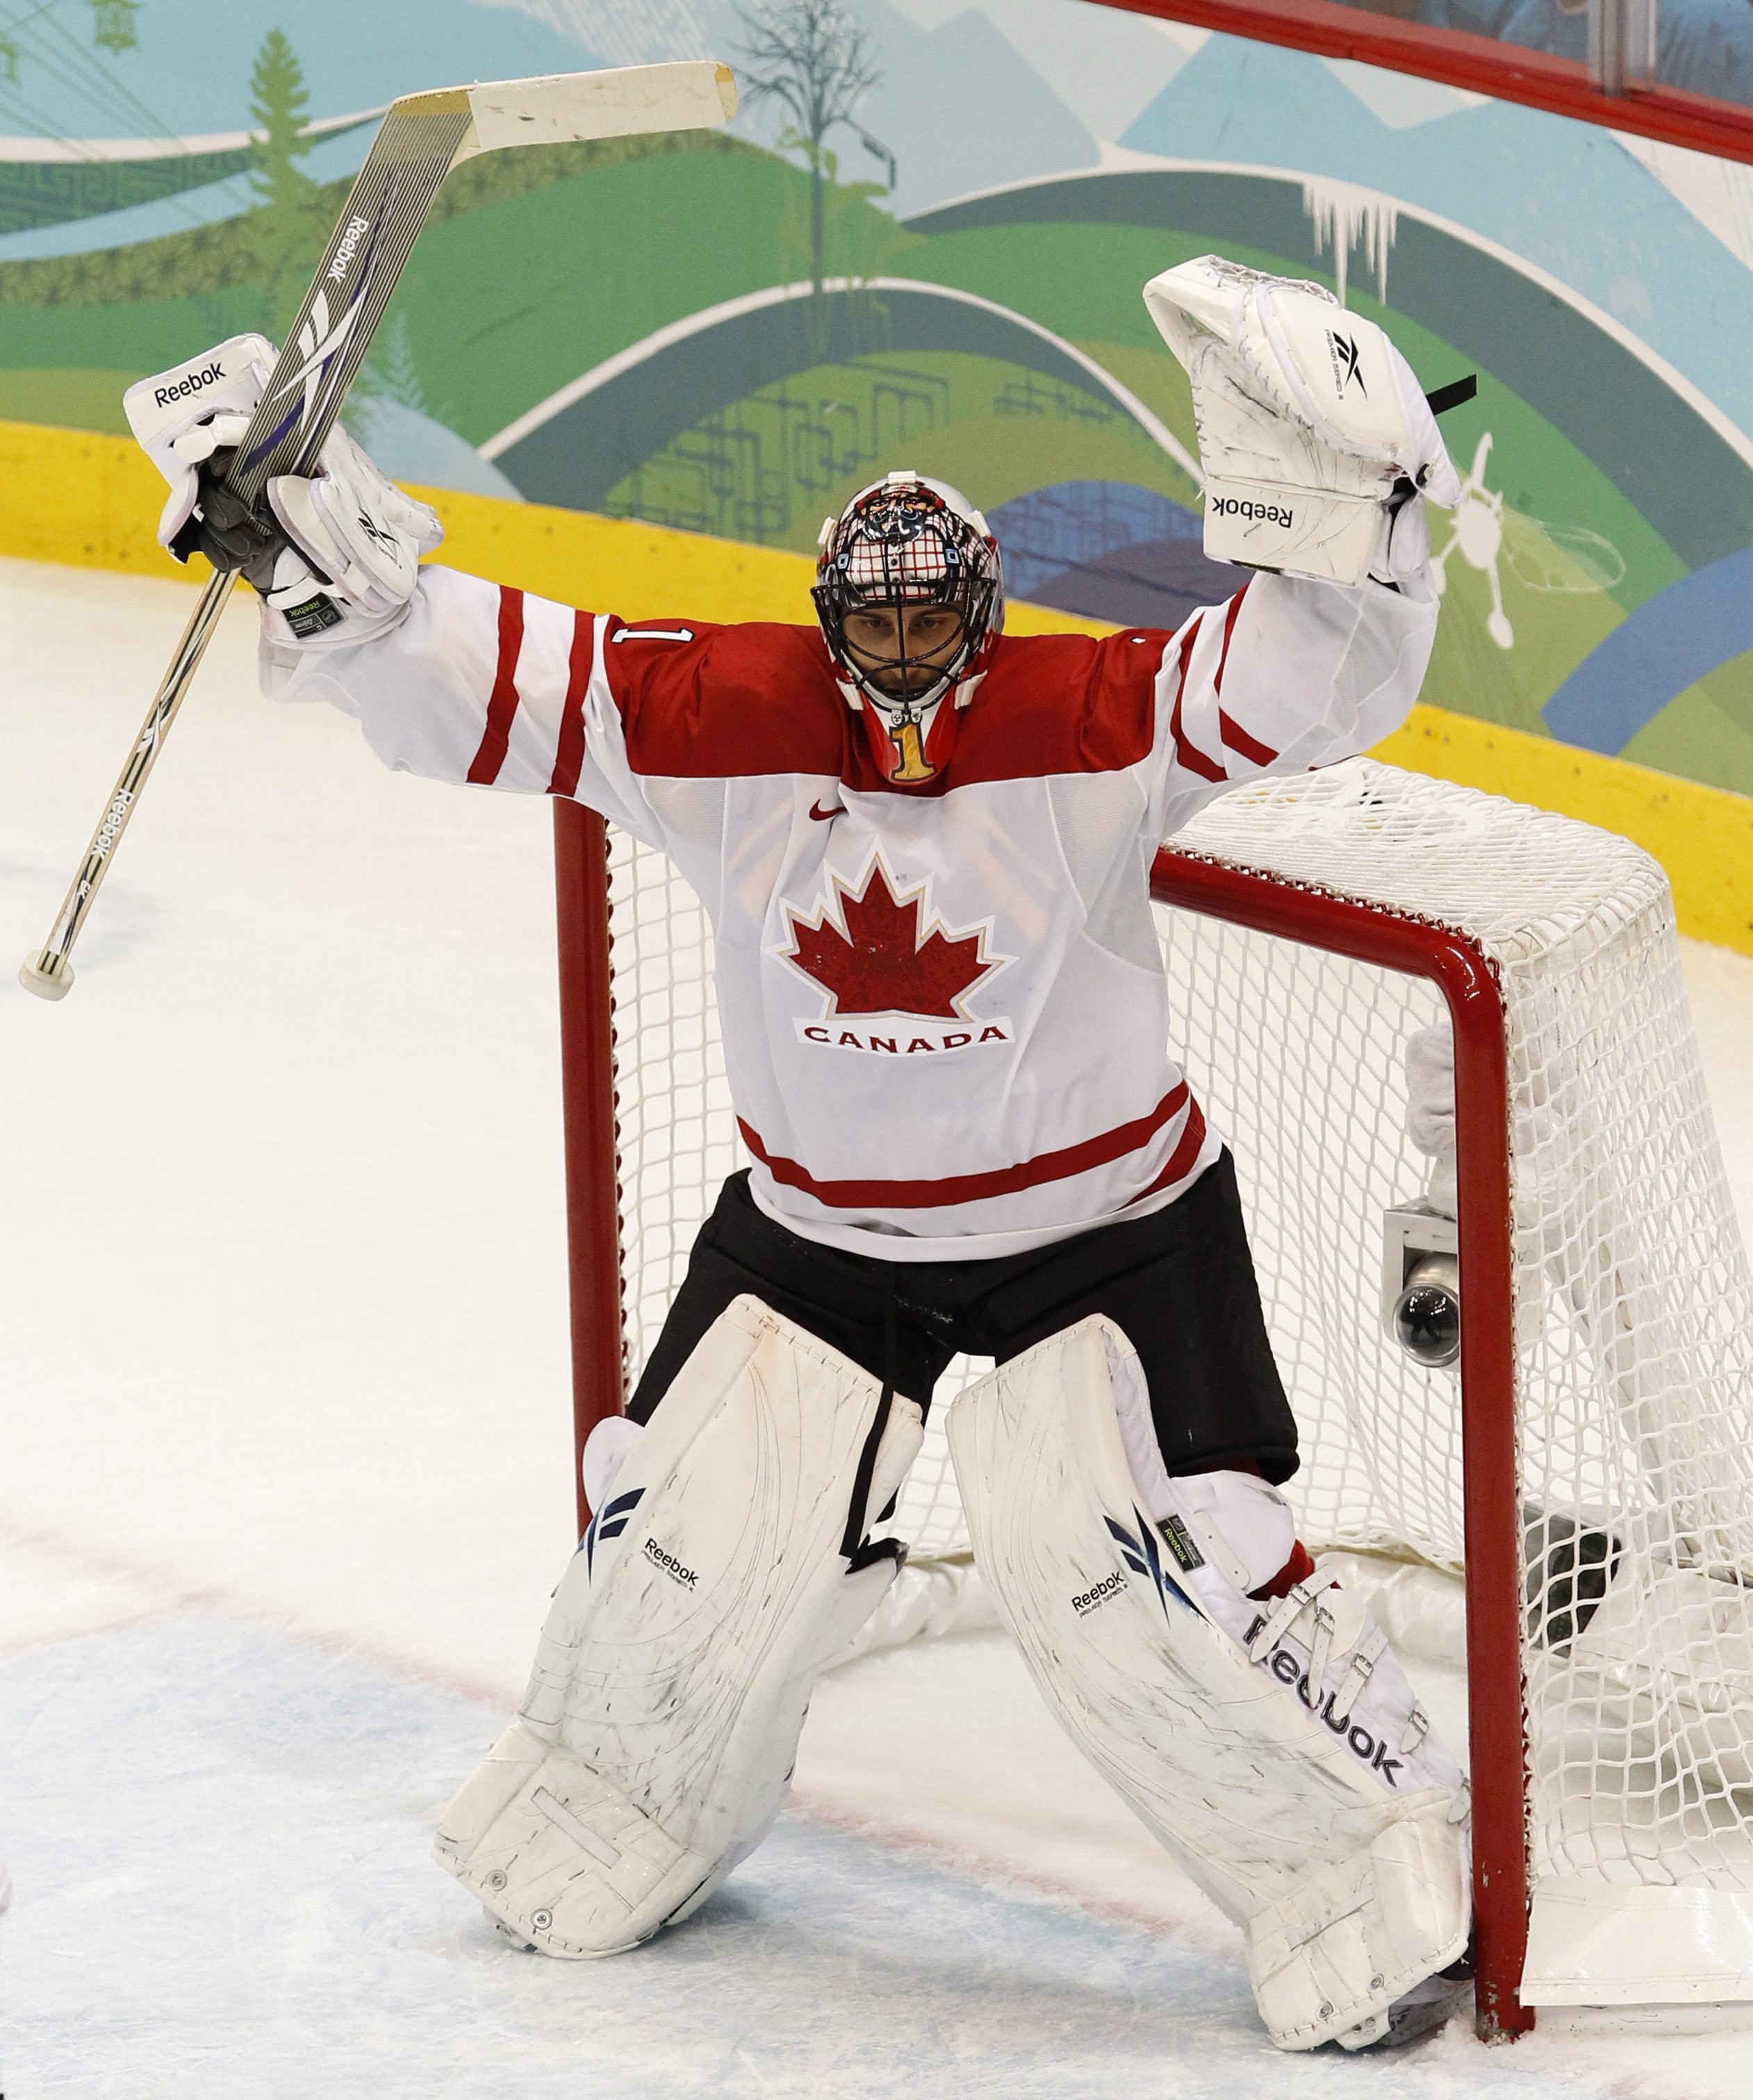 Team Canada on X: Two-time Olympic champ Roberto Luongo is